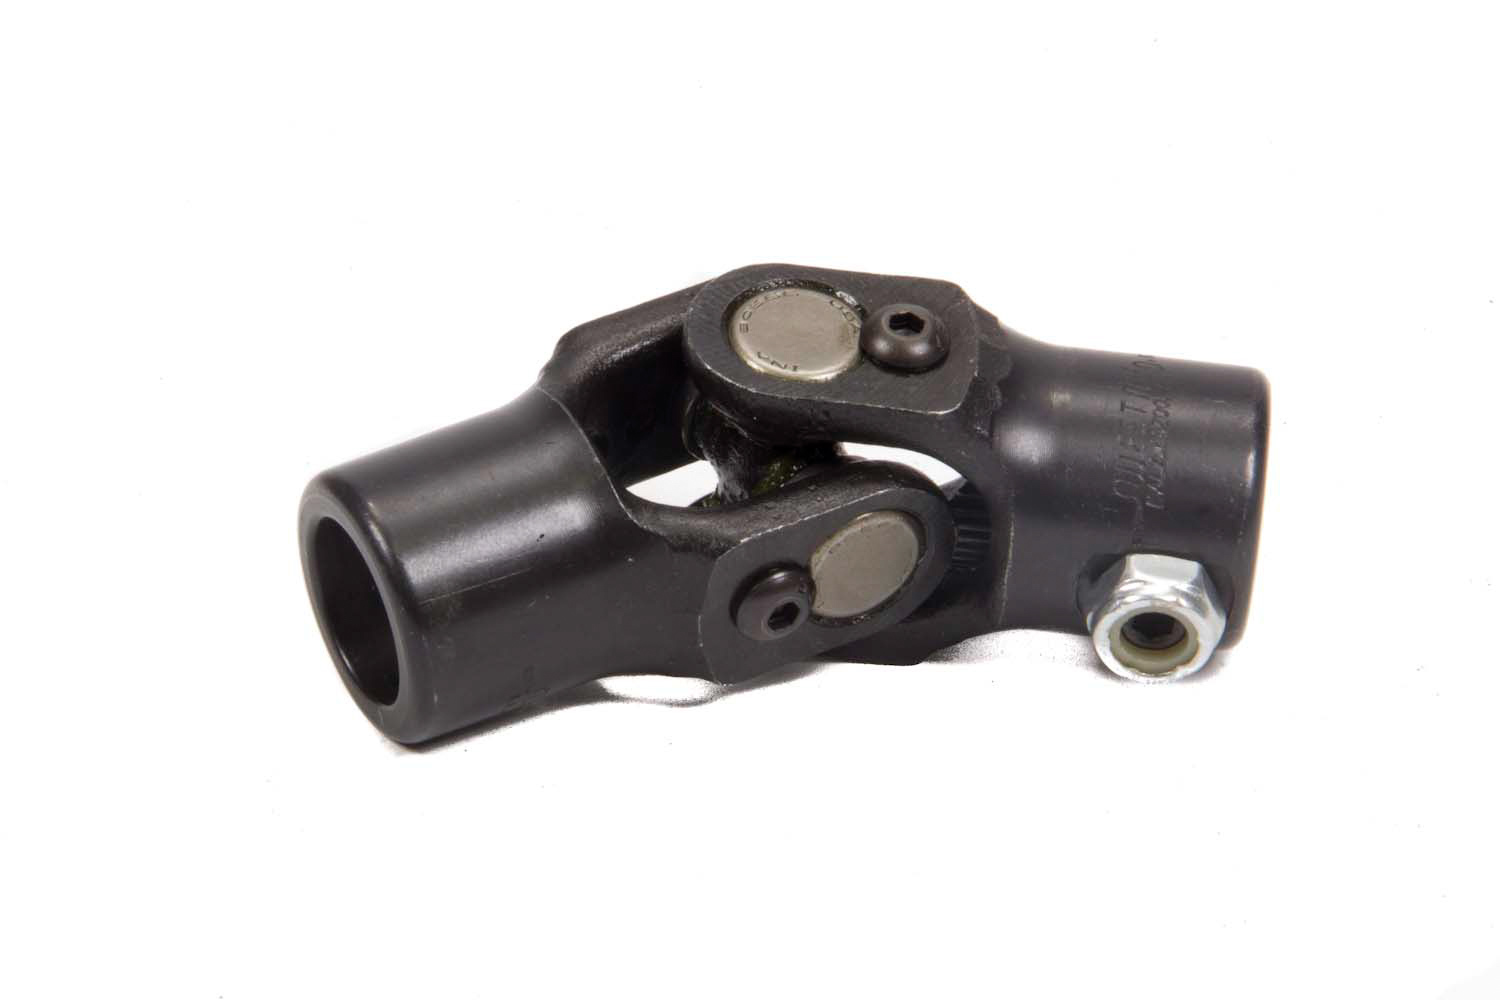 Sweet Manufacturing 401-50623 Steering Universal Joint, Single Joint, 3/4 in Smooth Bore to 1 in Double D Aftermarket, Steel, Black Paint, Each